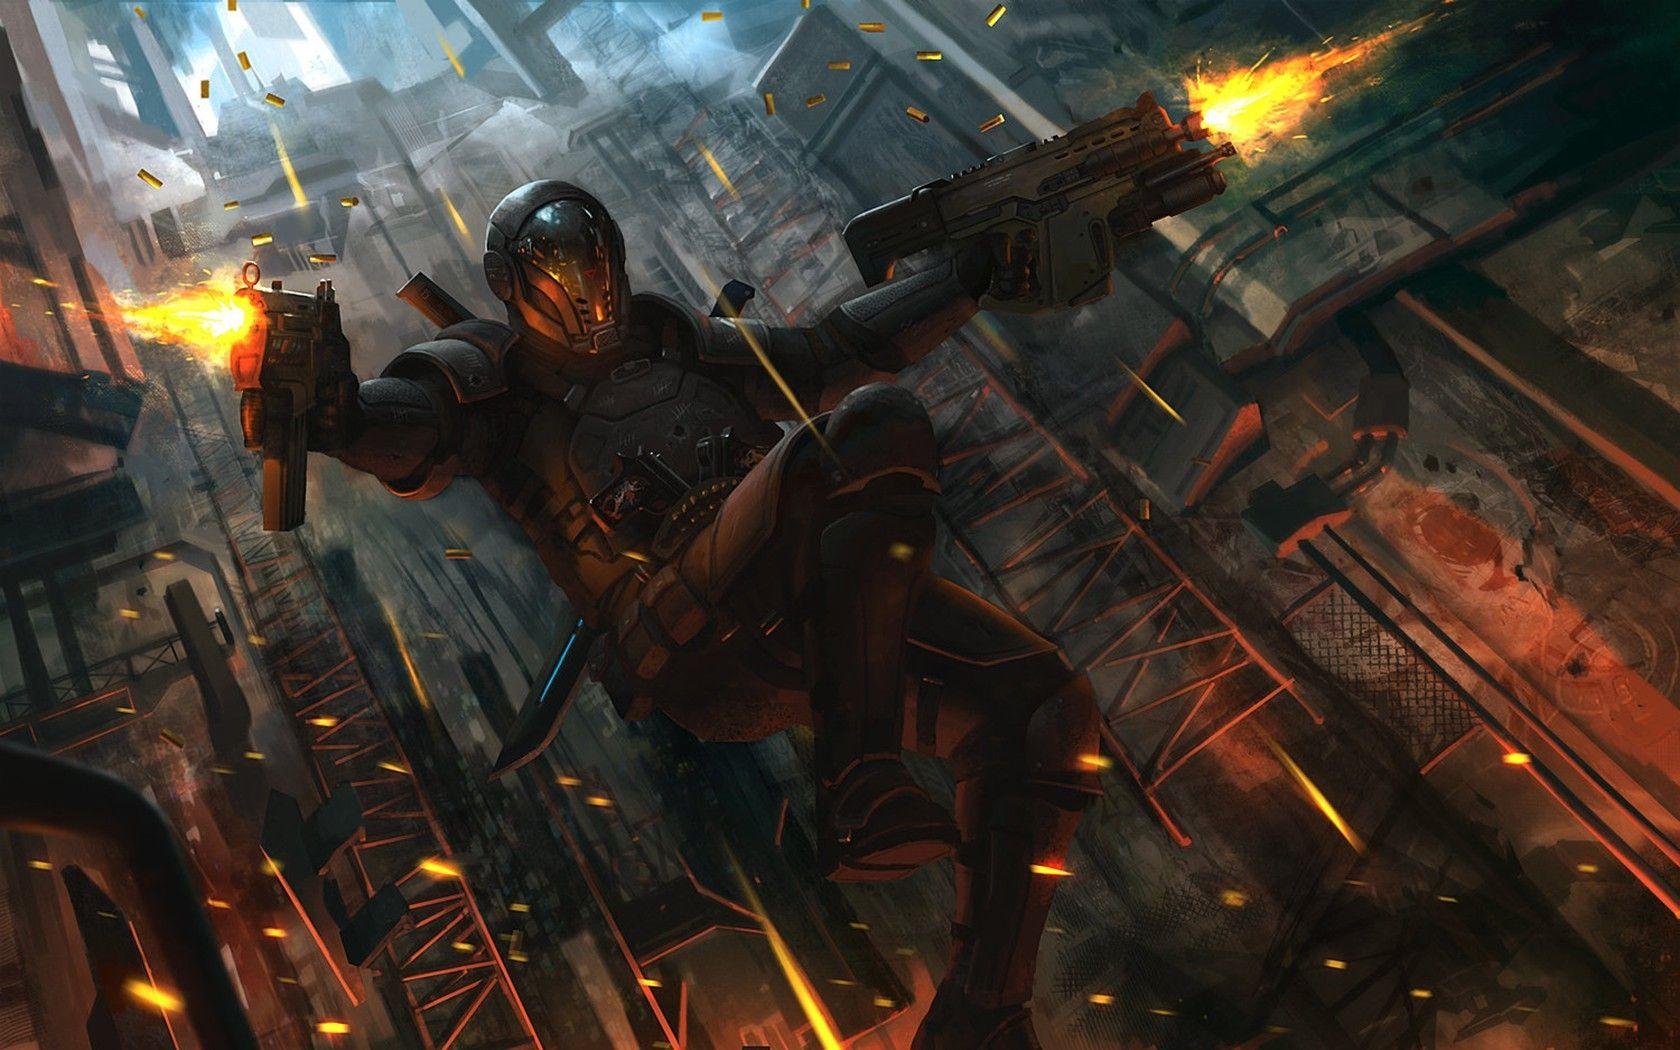 Soldiers Guns Paladin Drawings Sci Fi Action Wallpaper